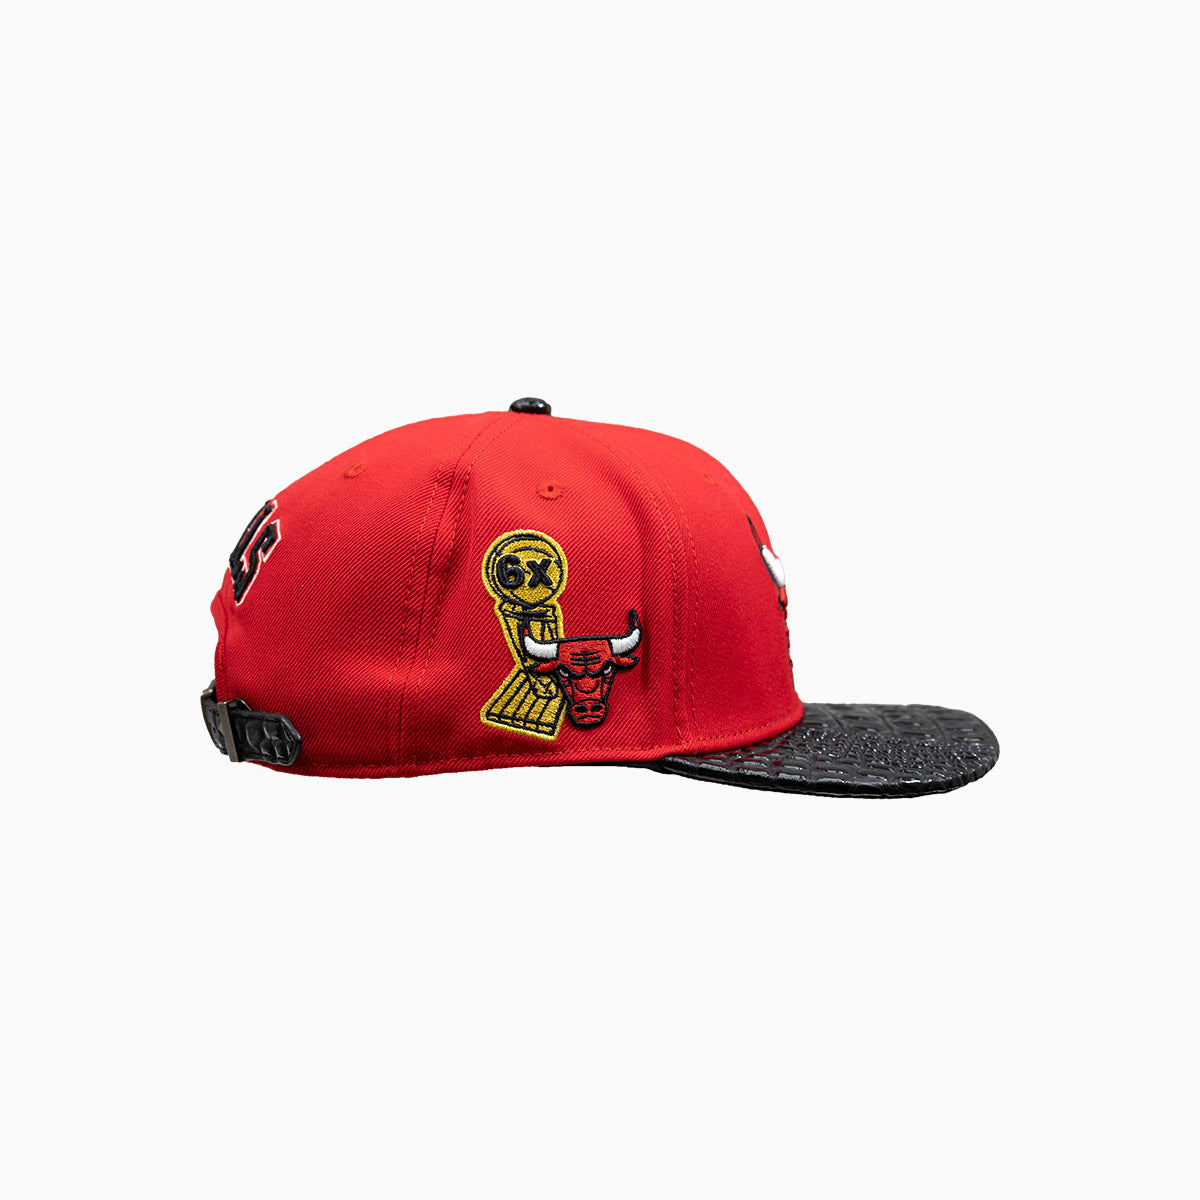 pro-standard-chicago-bulls-nba-hat-with-leather-visor-bcb756501a1-rbk